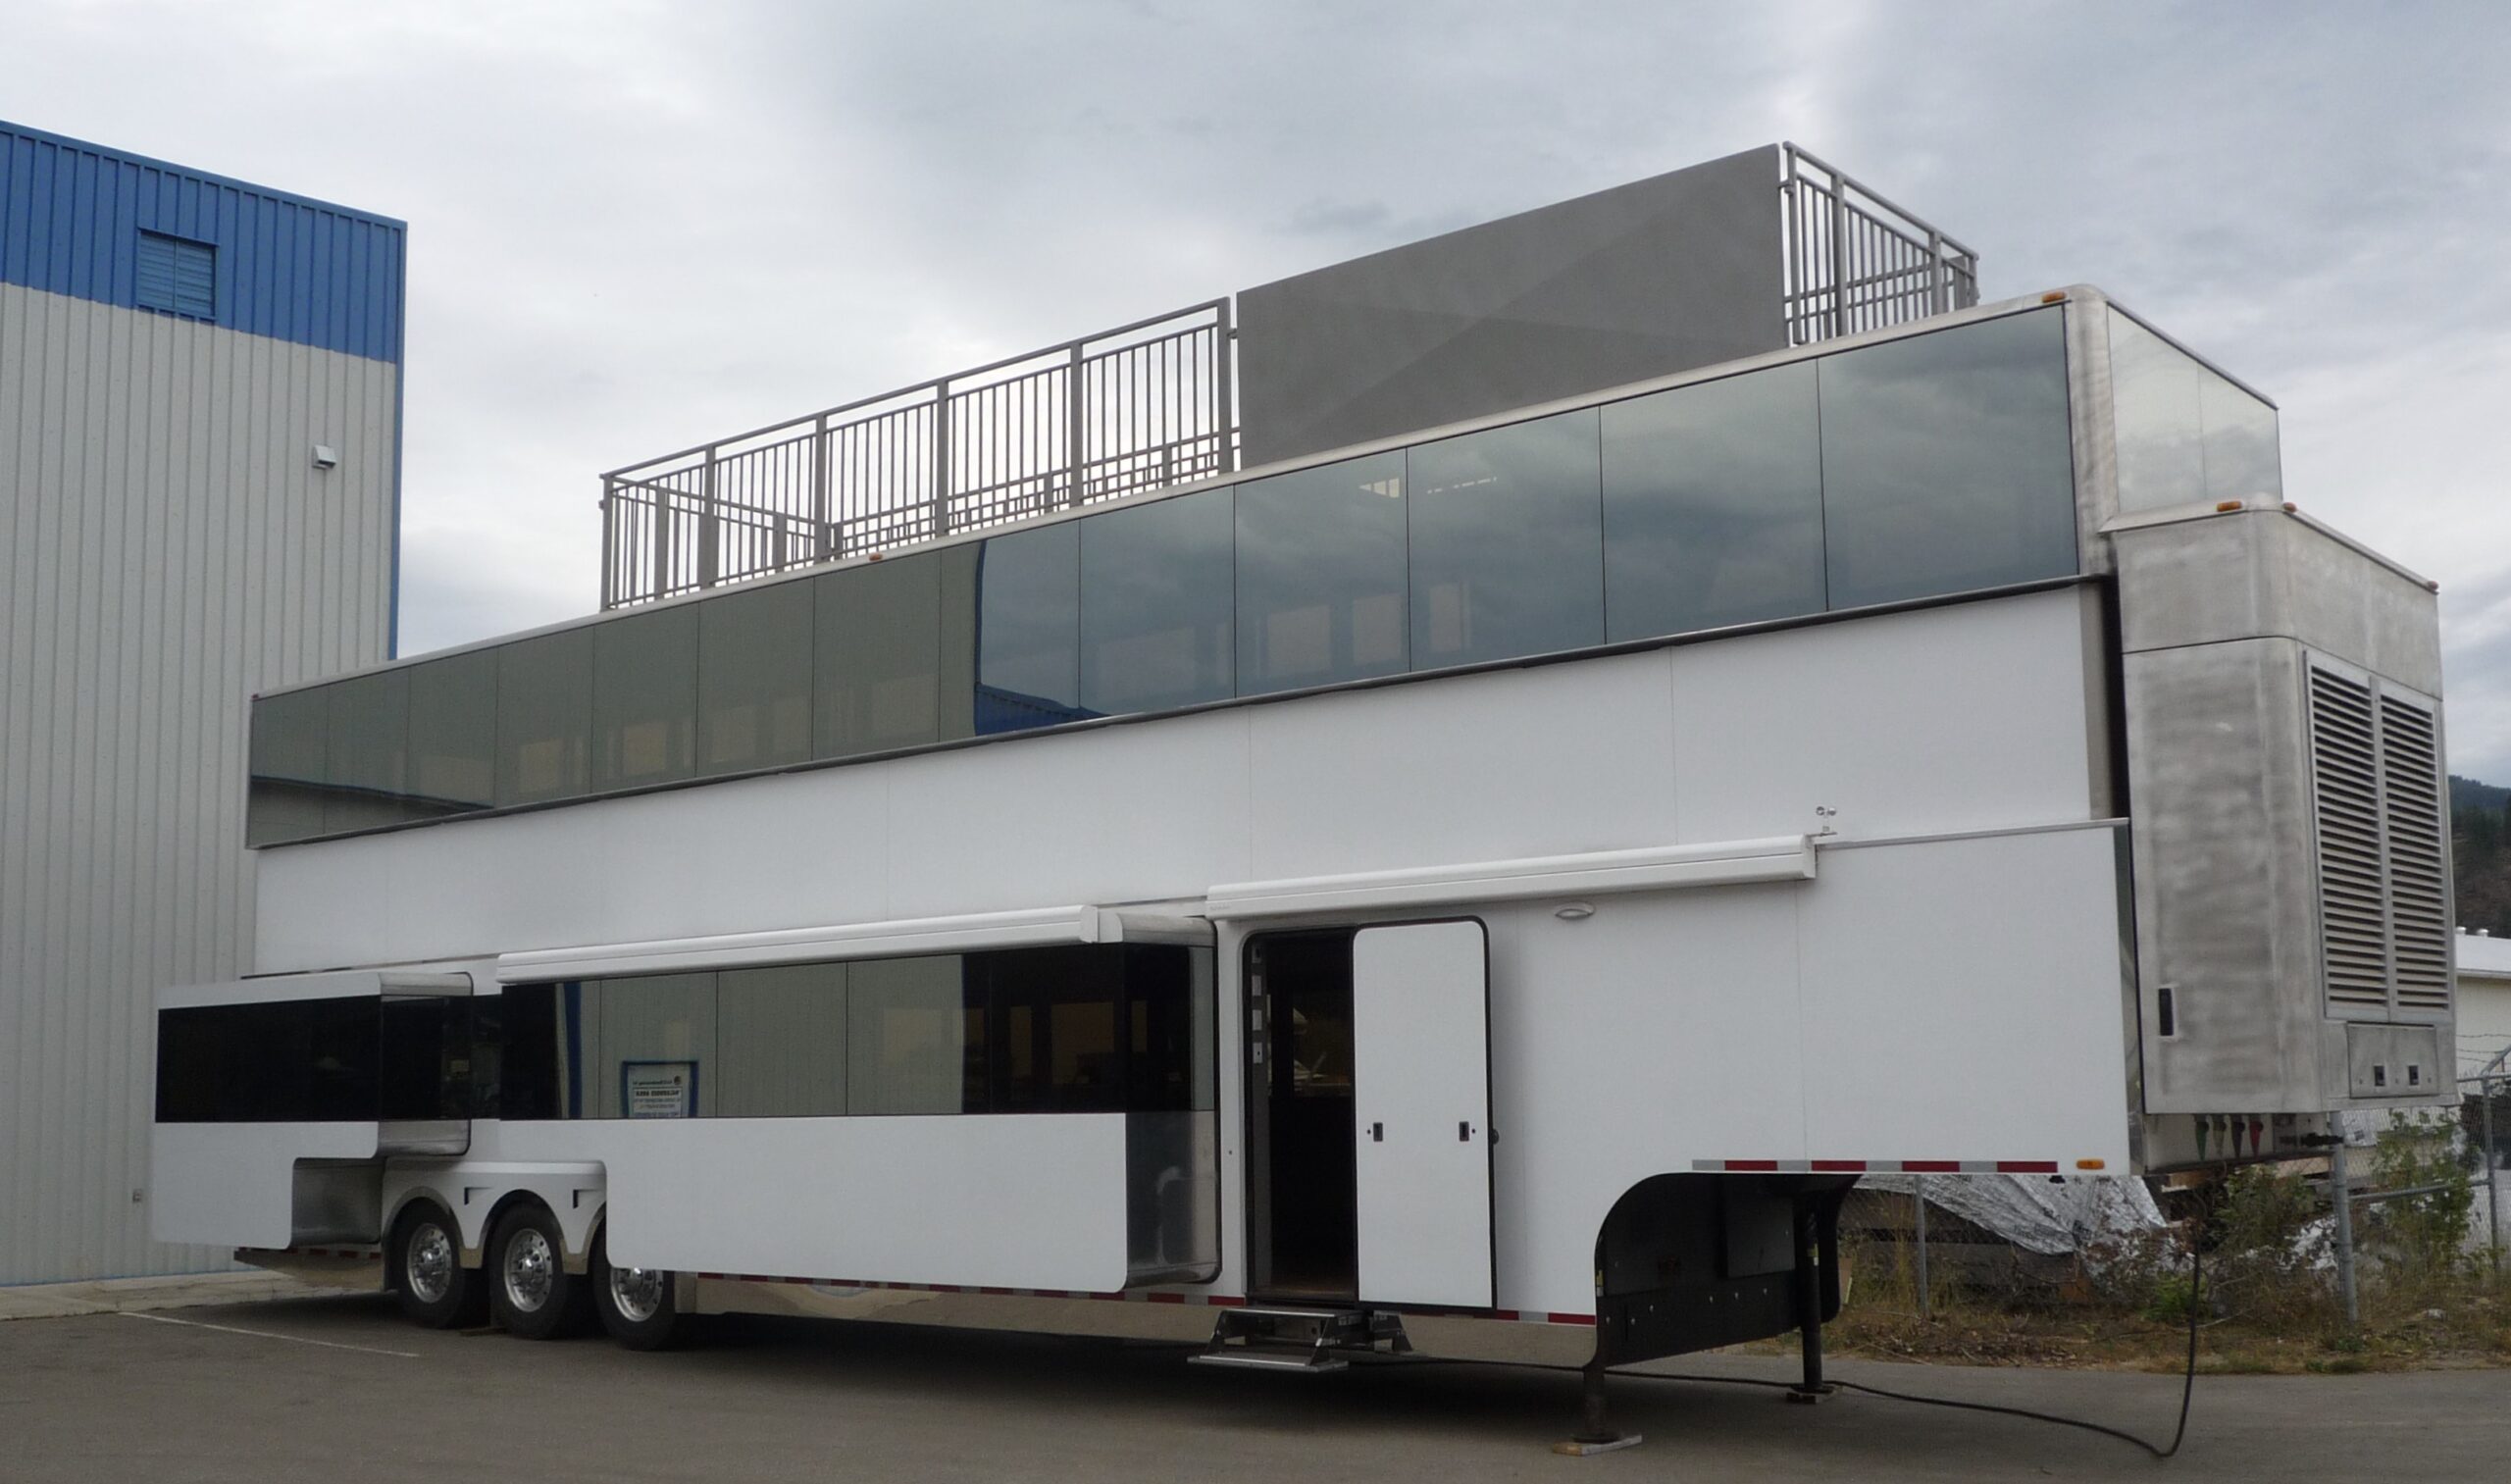 3 Story Event Trailer representing the selection of entertainment trailers that Valid offers